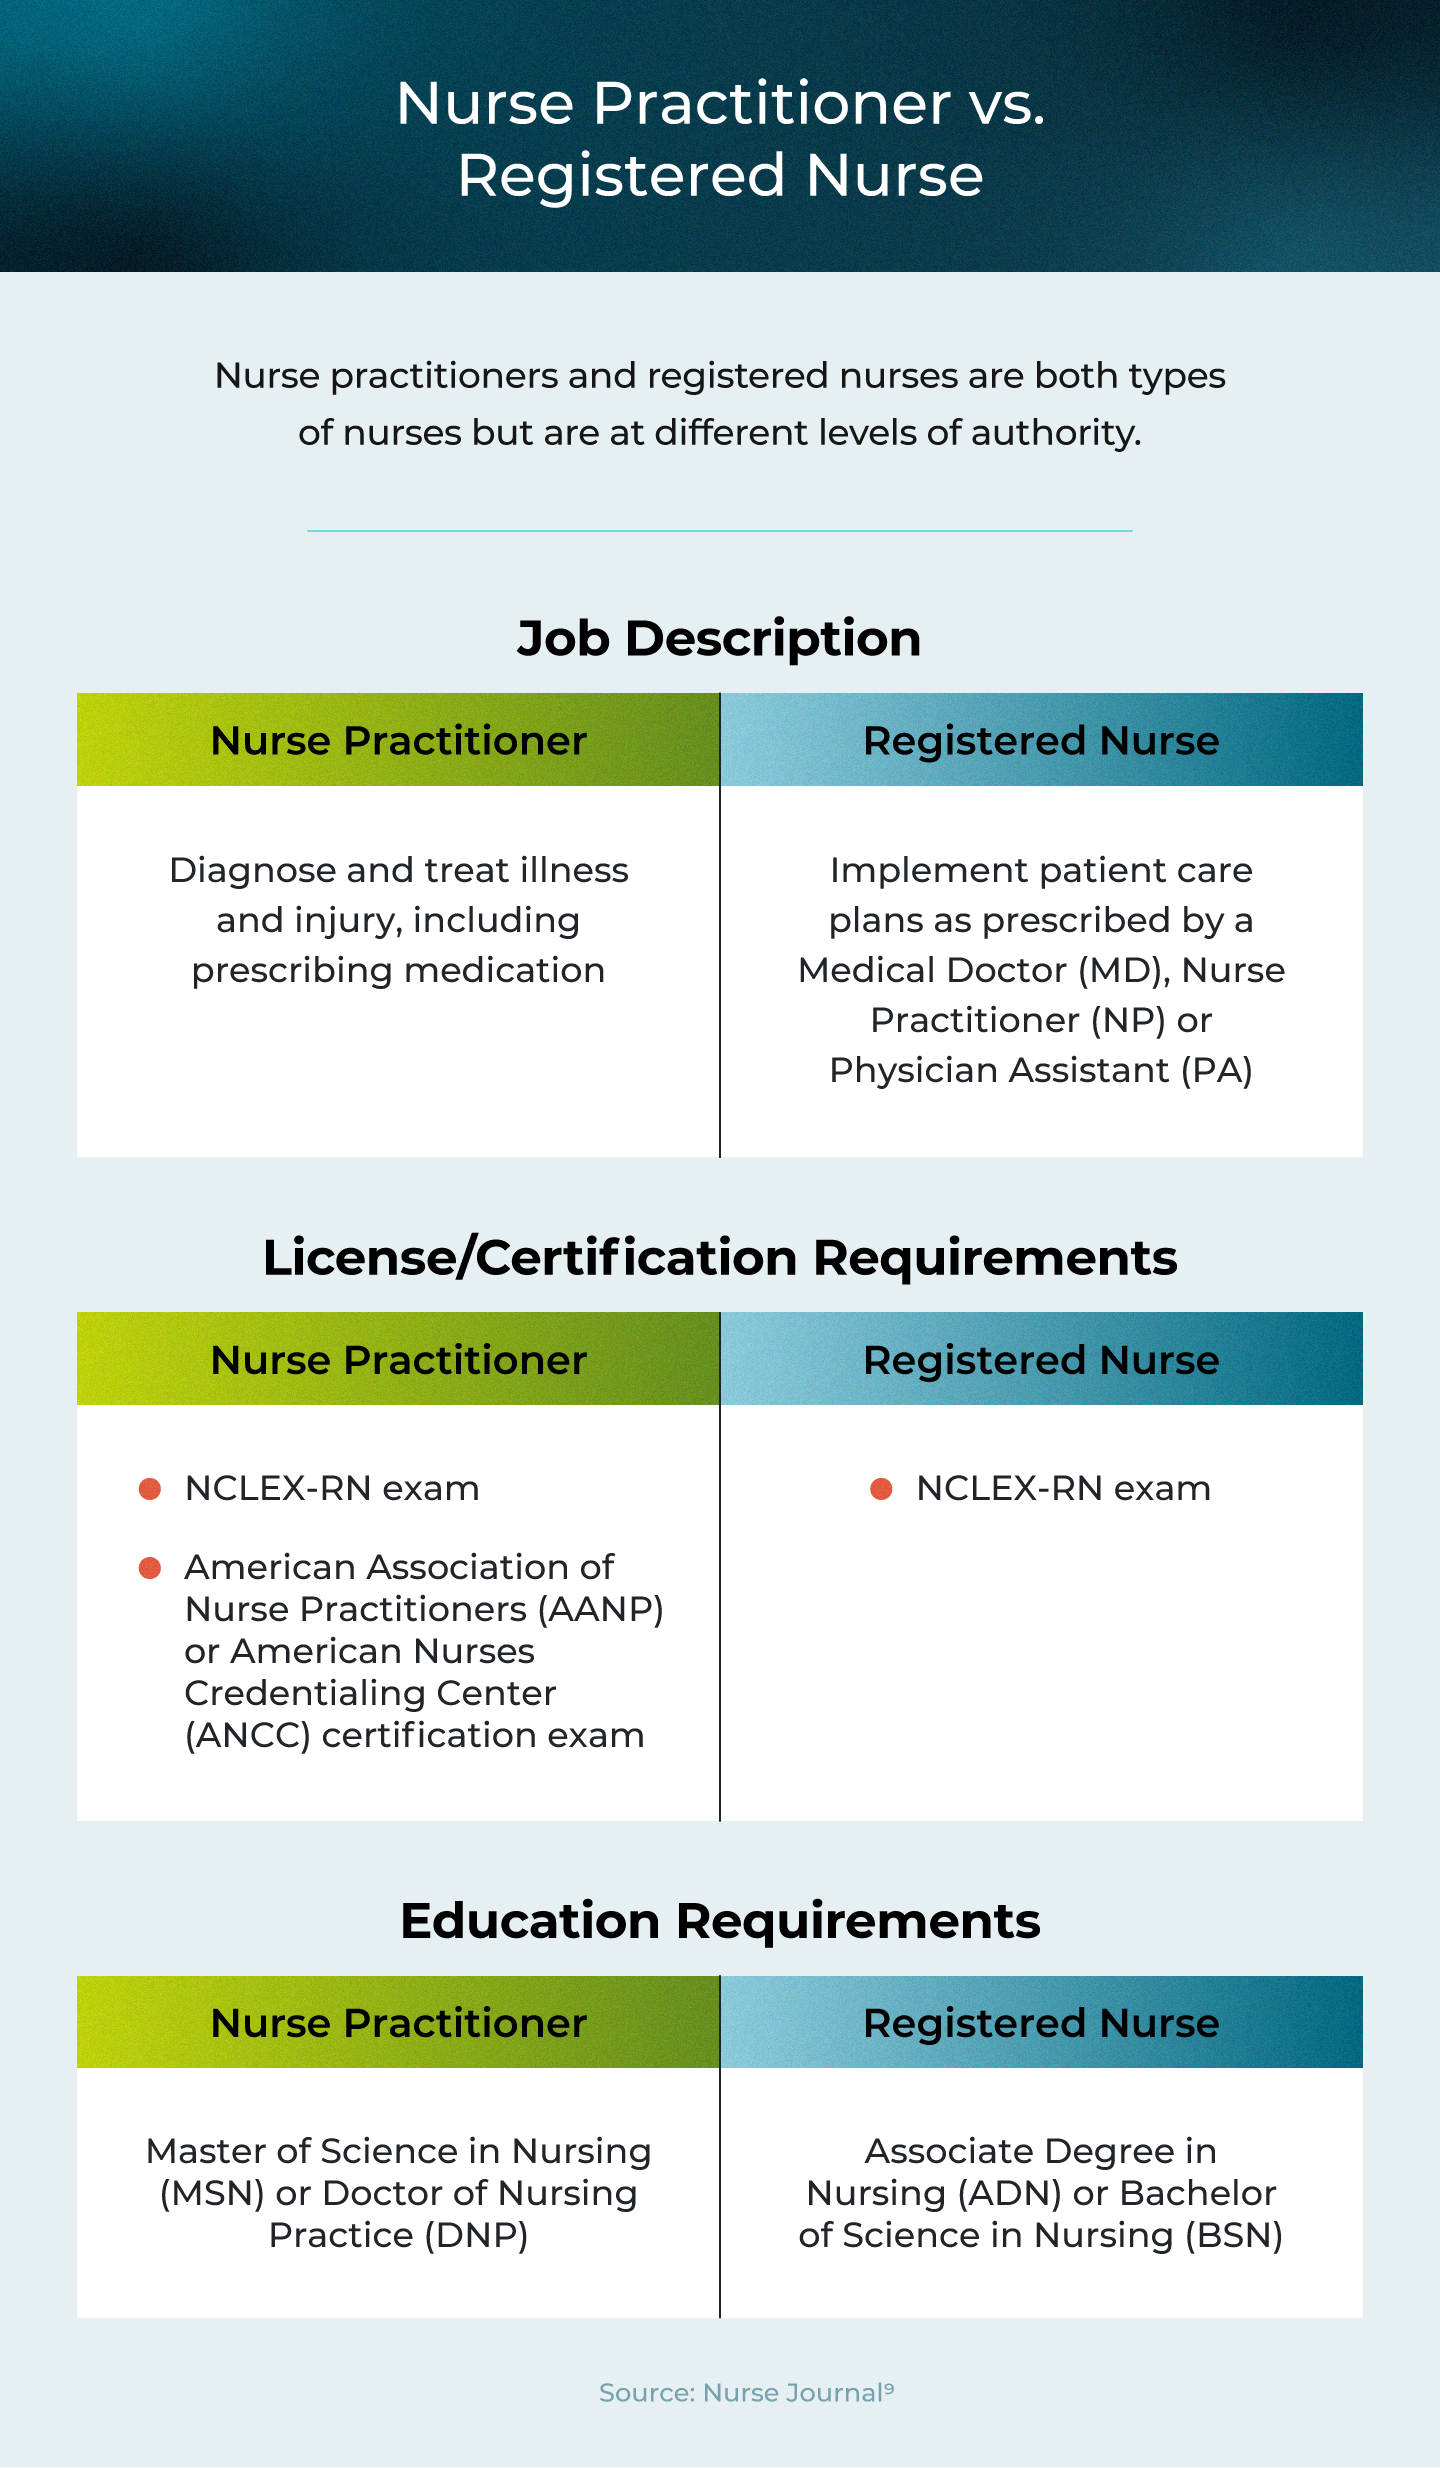 Summary of the differences between a nurse practitioner and a registered nurse.